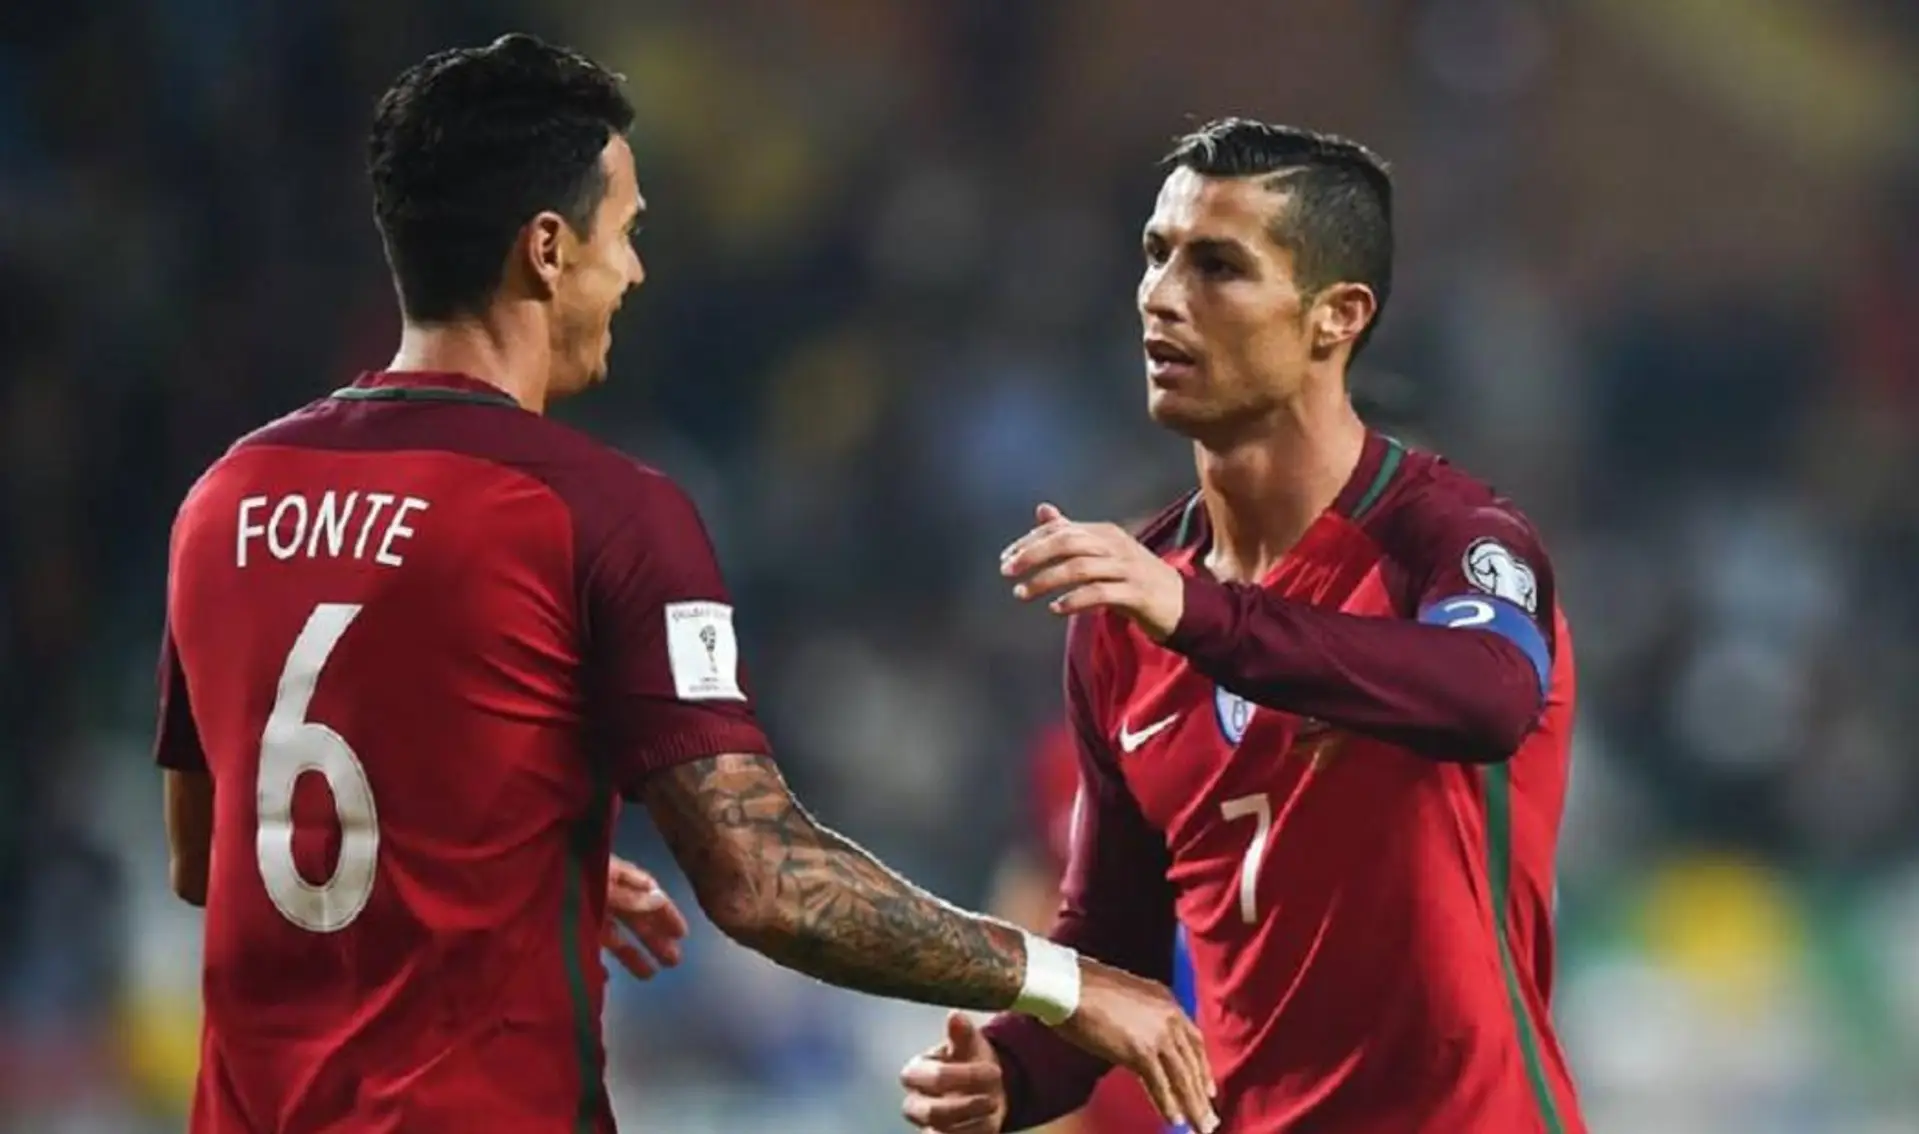 'I wouldn’t be surprised if he goes back to Real Madrid': Ronaldo's Portugal teammate Fonte fuels talk of Bernabeu return